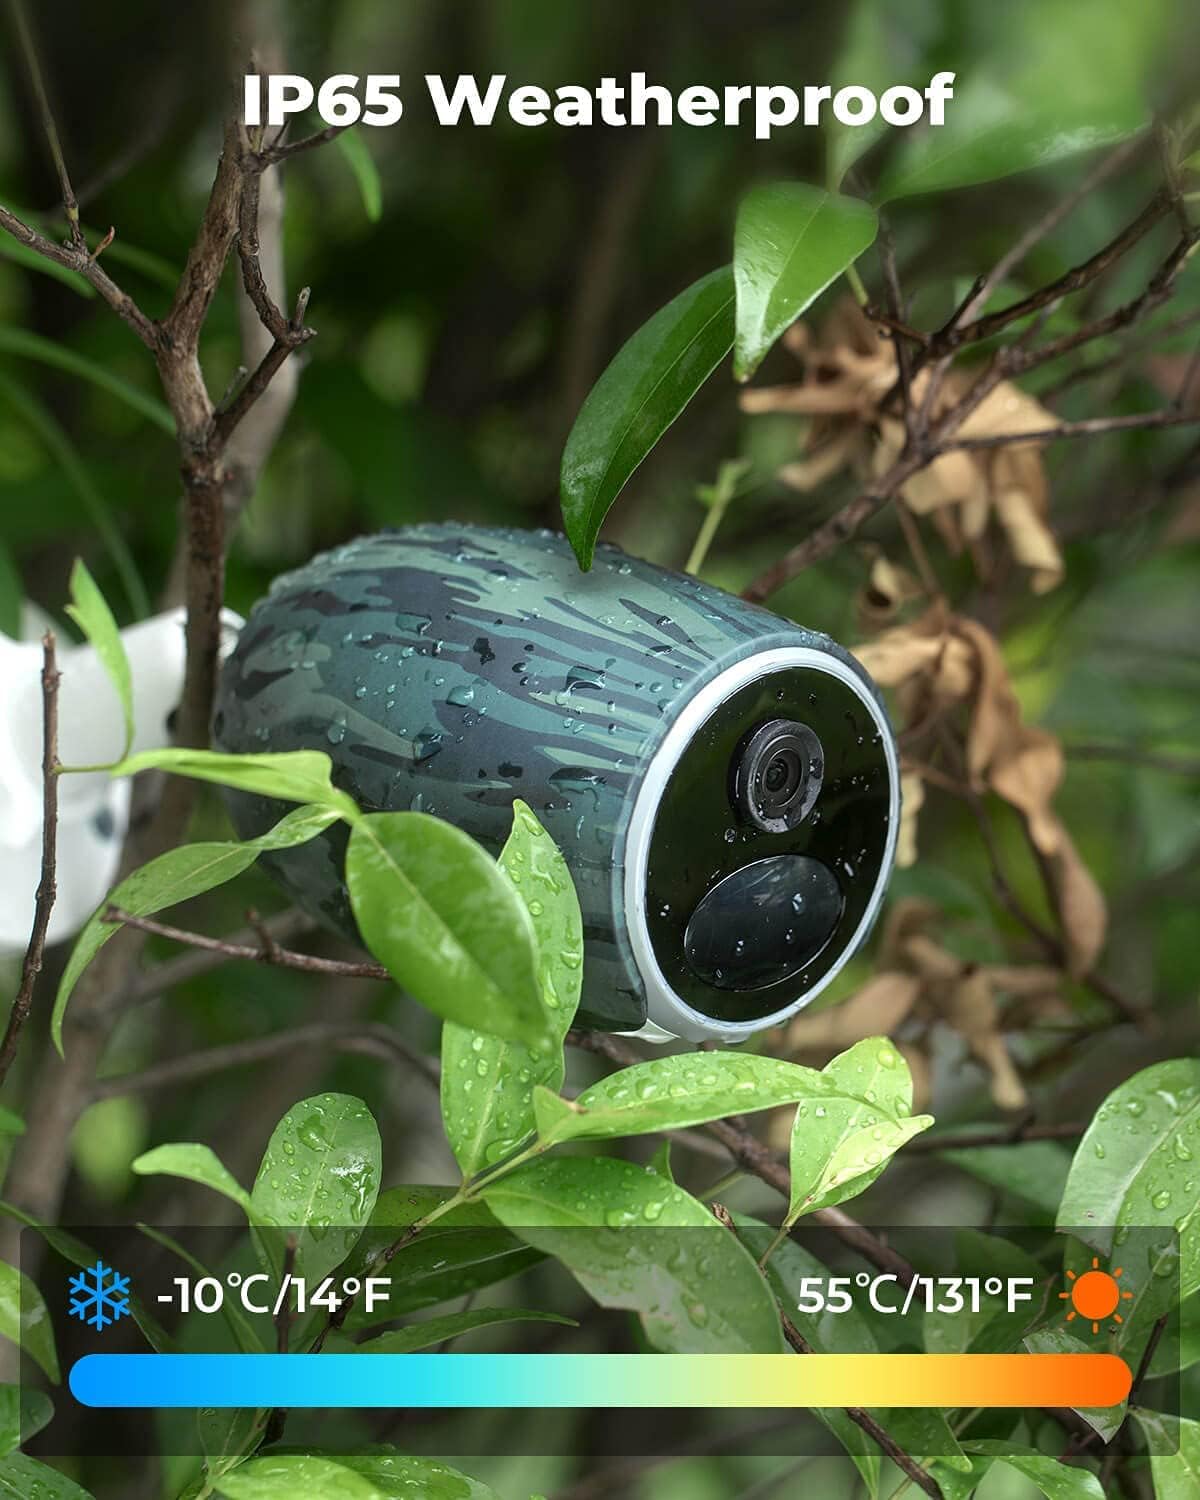 REOLINK Go Plus: 4MP (2560 x 1440) - 15fps, 95° Lens, Night Vision Range up to 10m, Built-in Microphone, Motion Detection with Human and Vehicle Detection, LTE Connectivity, Free Mobile App Included - Spy-shop.com